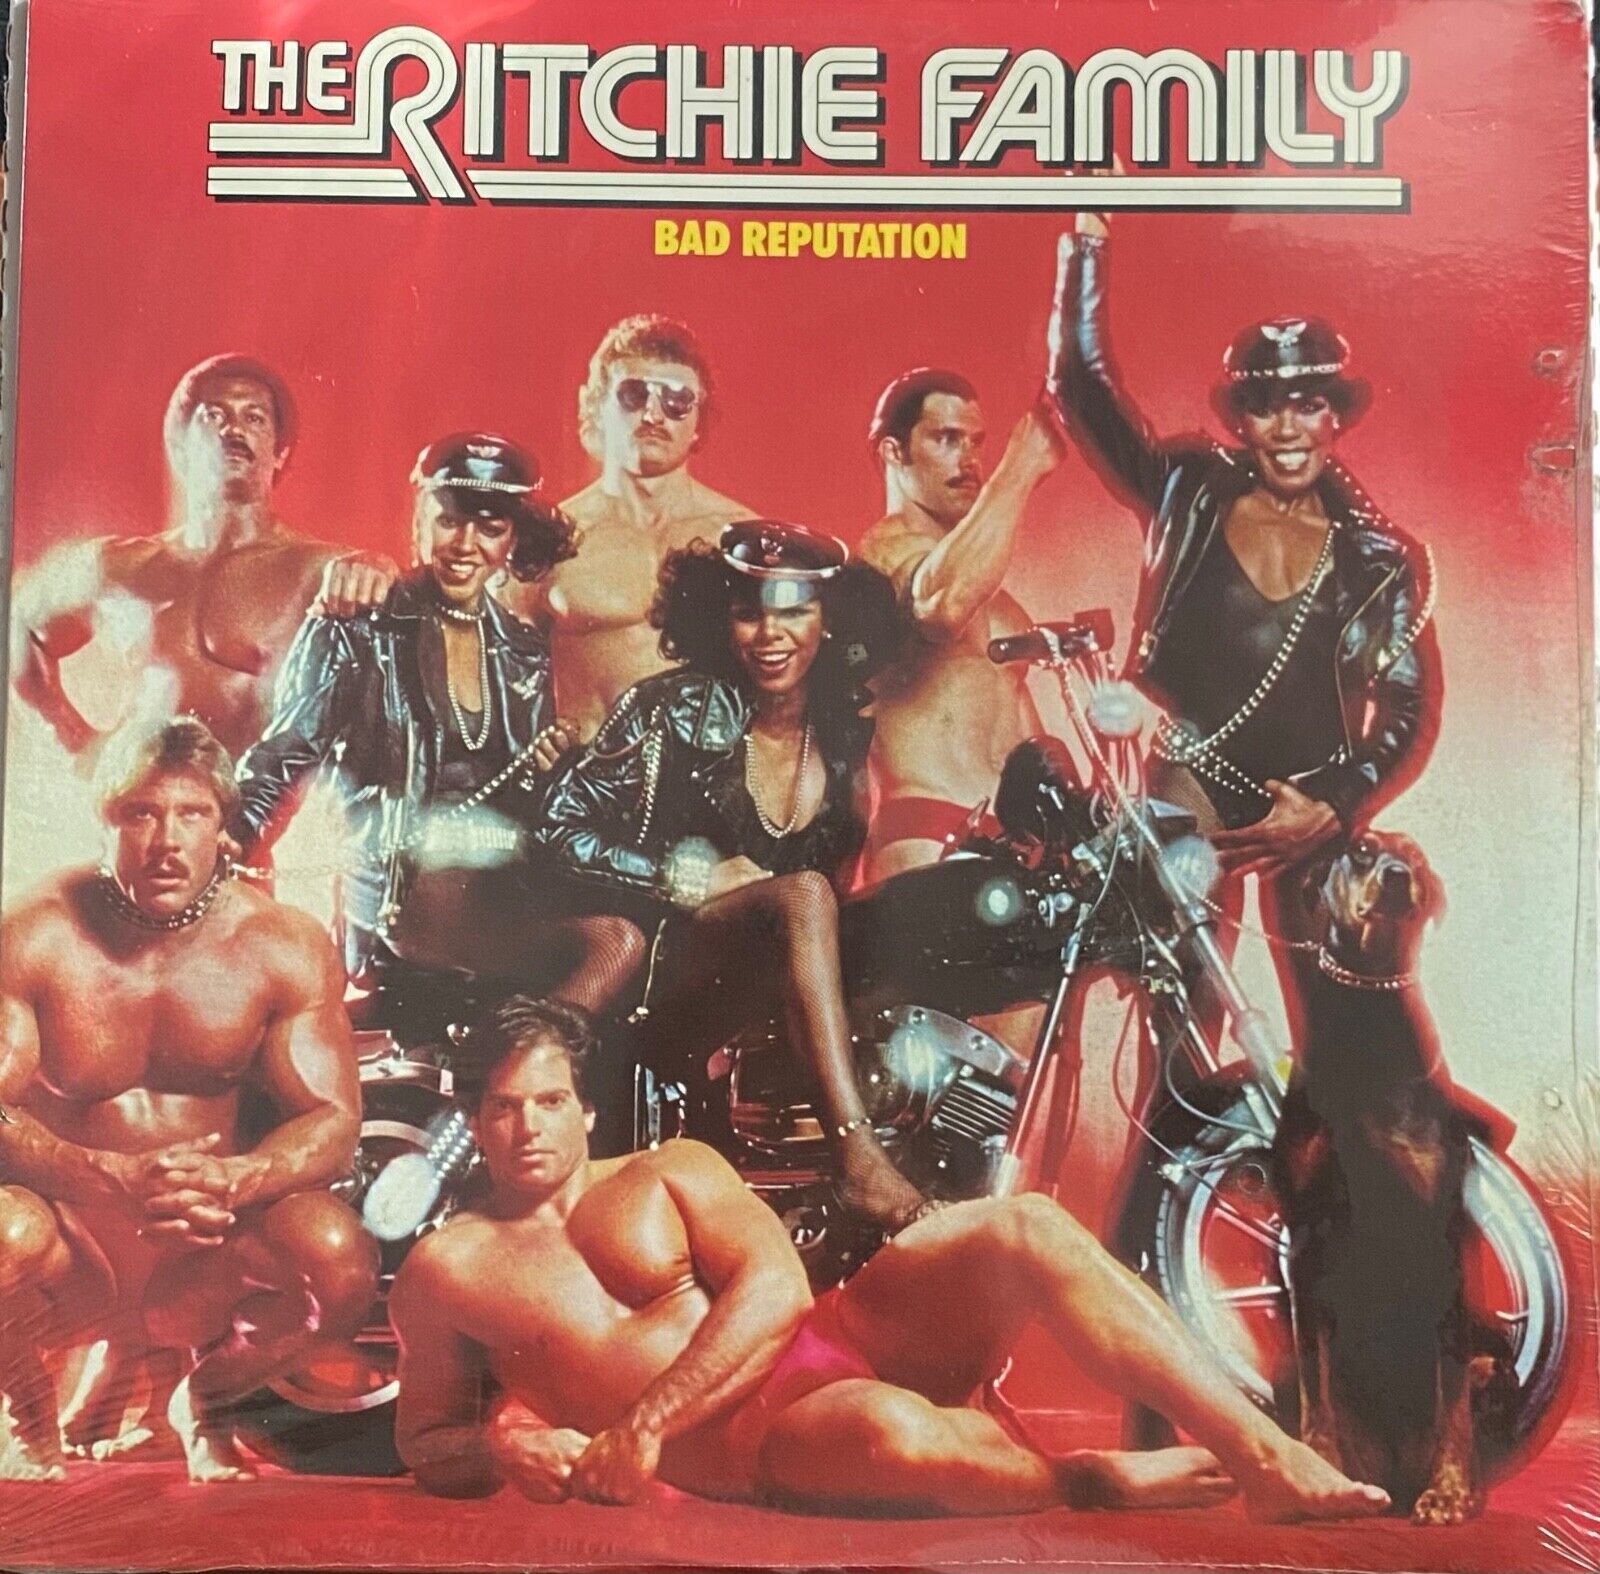 The Ritchie Family Bad Reputation Vinyl Record LP